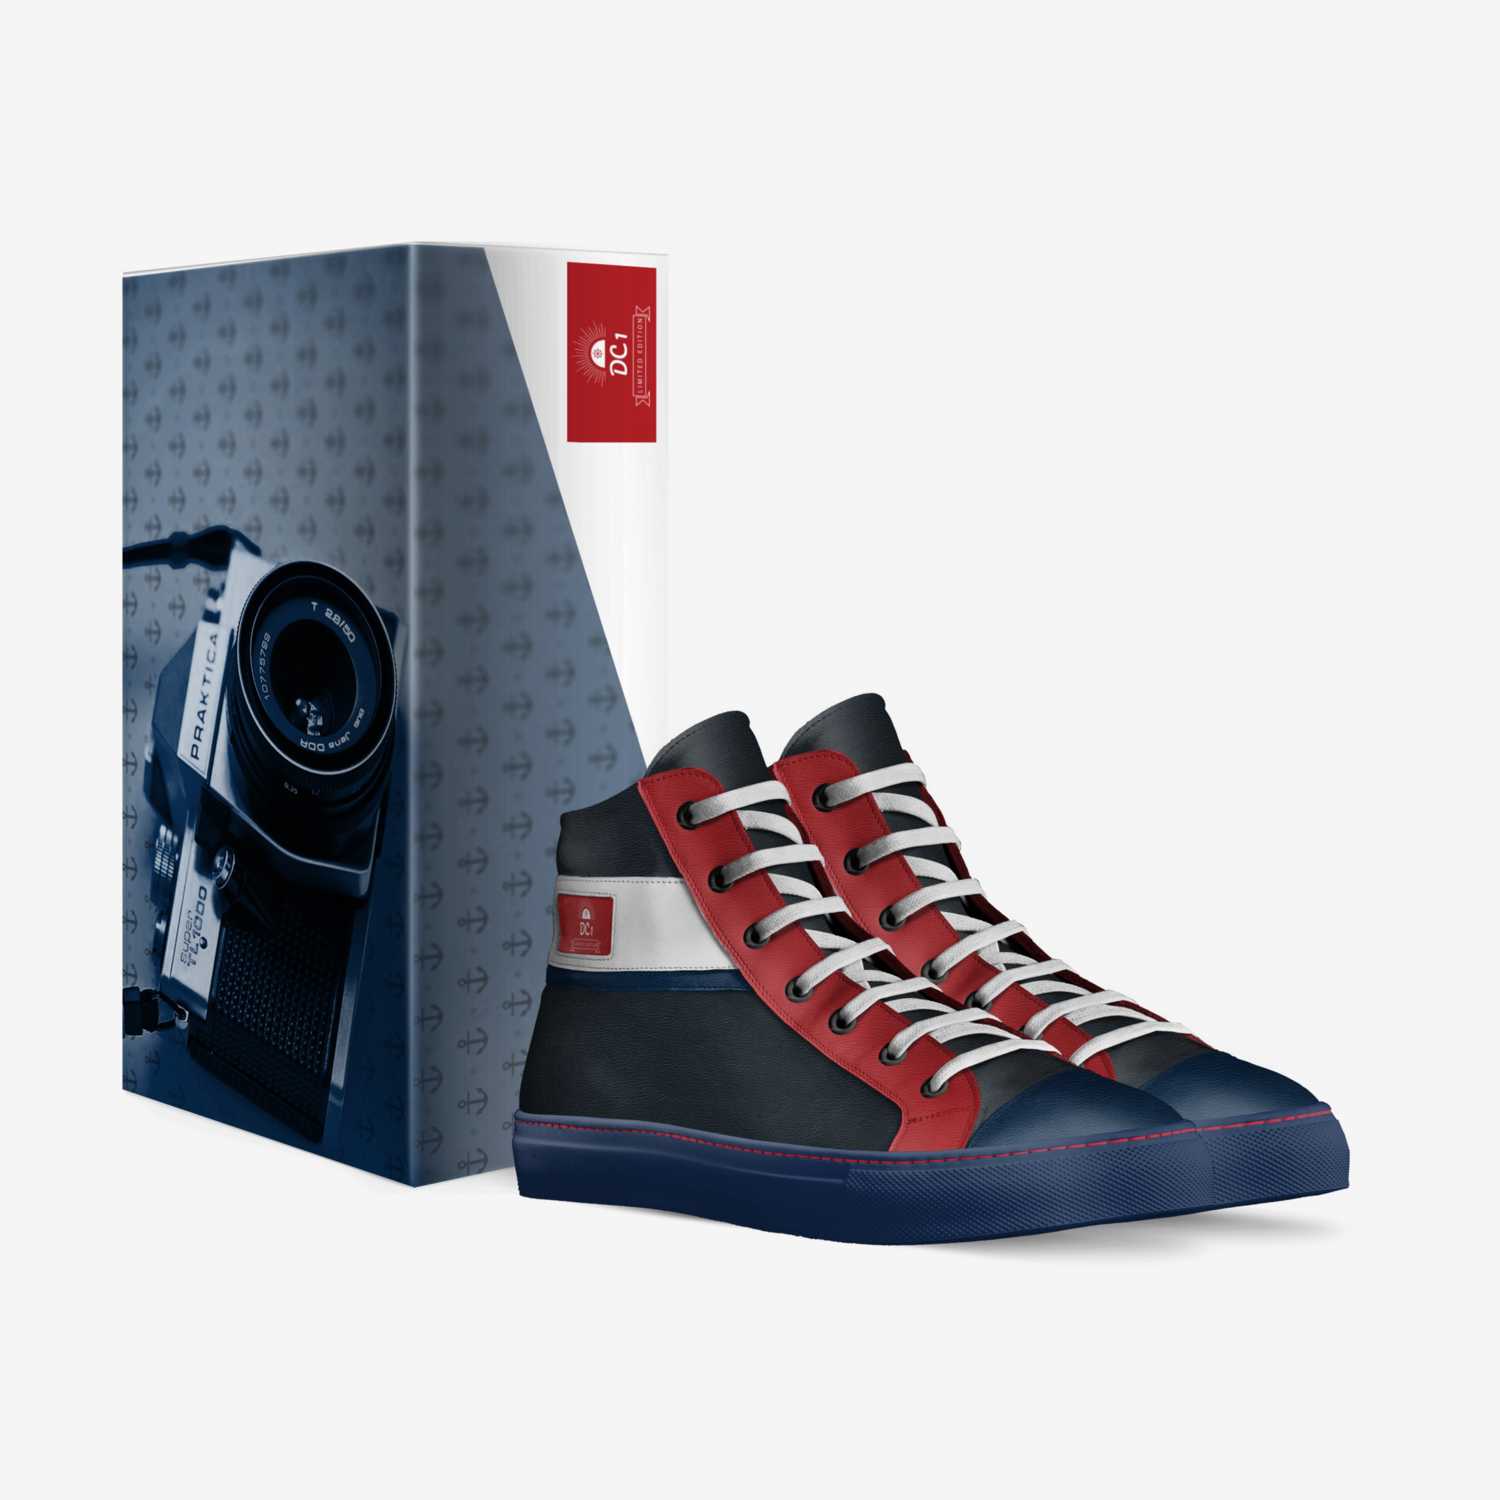 DC 1 custom made in Italy shoes by Davin Cross | Box view